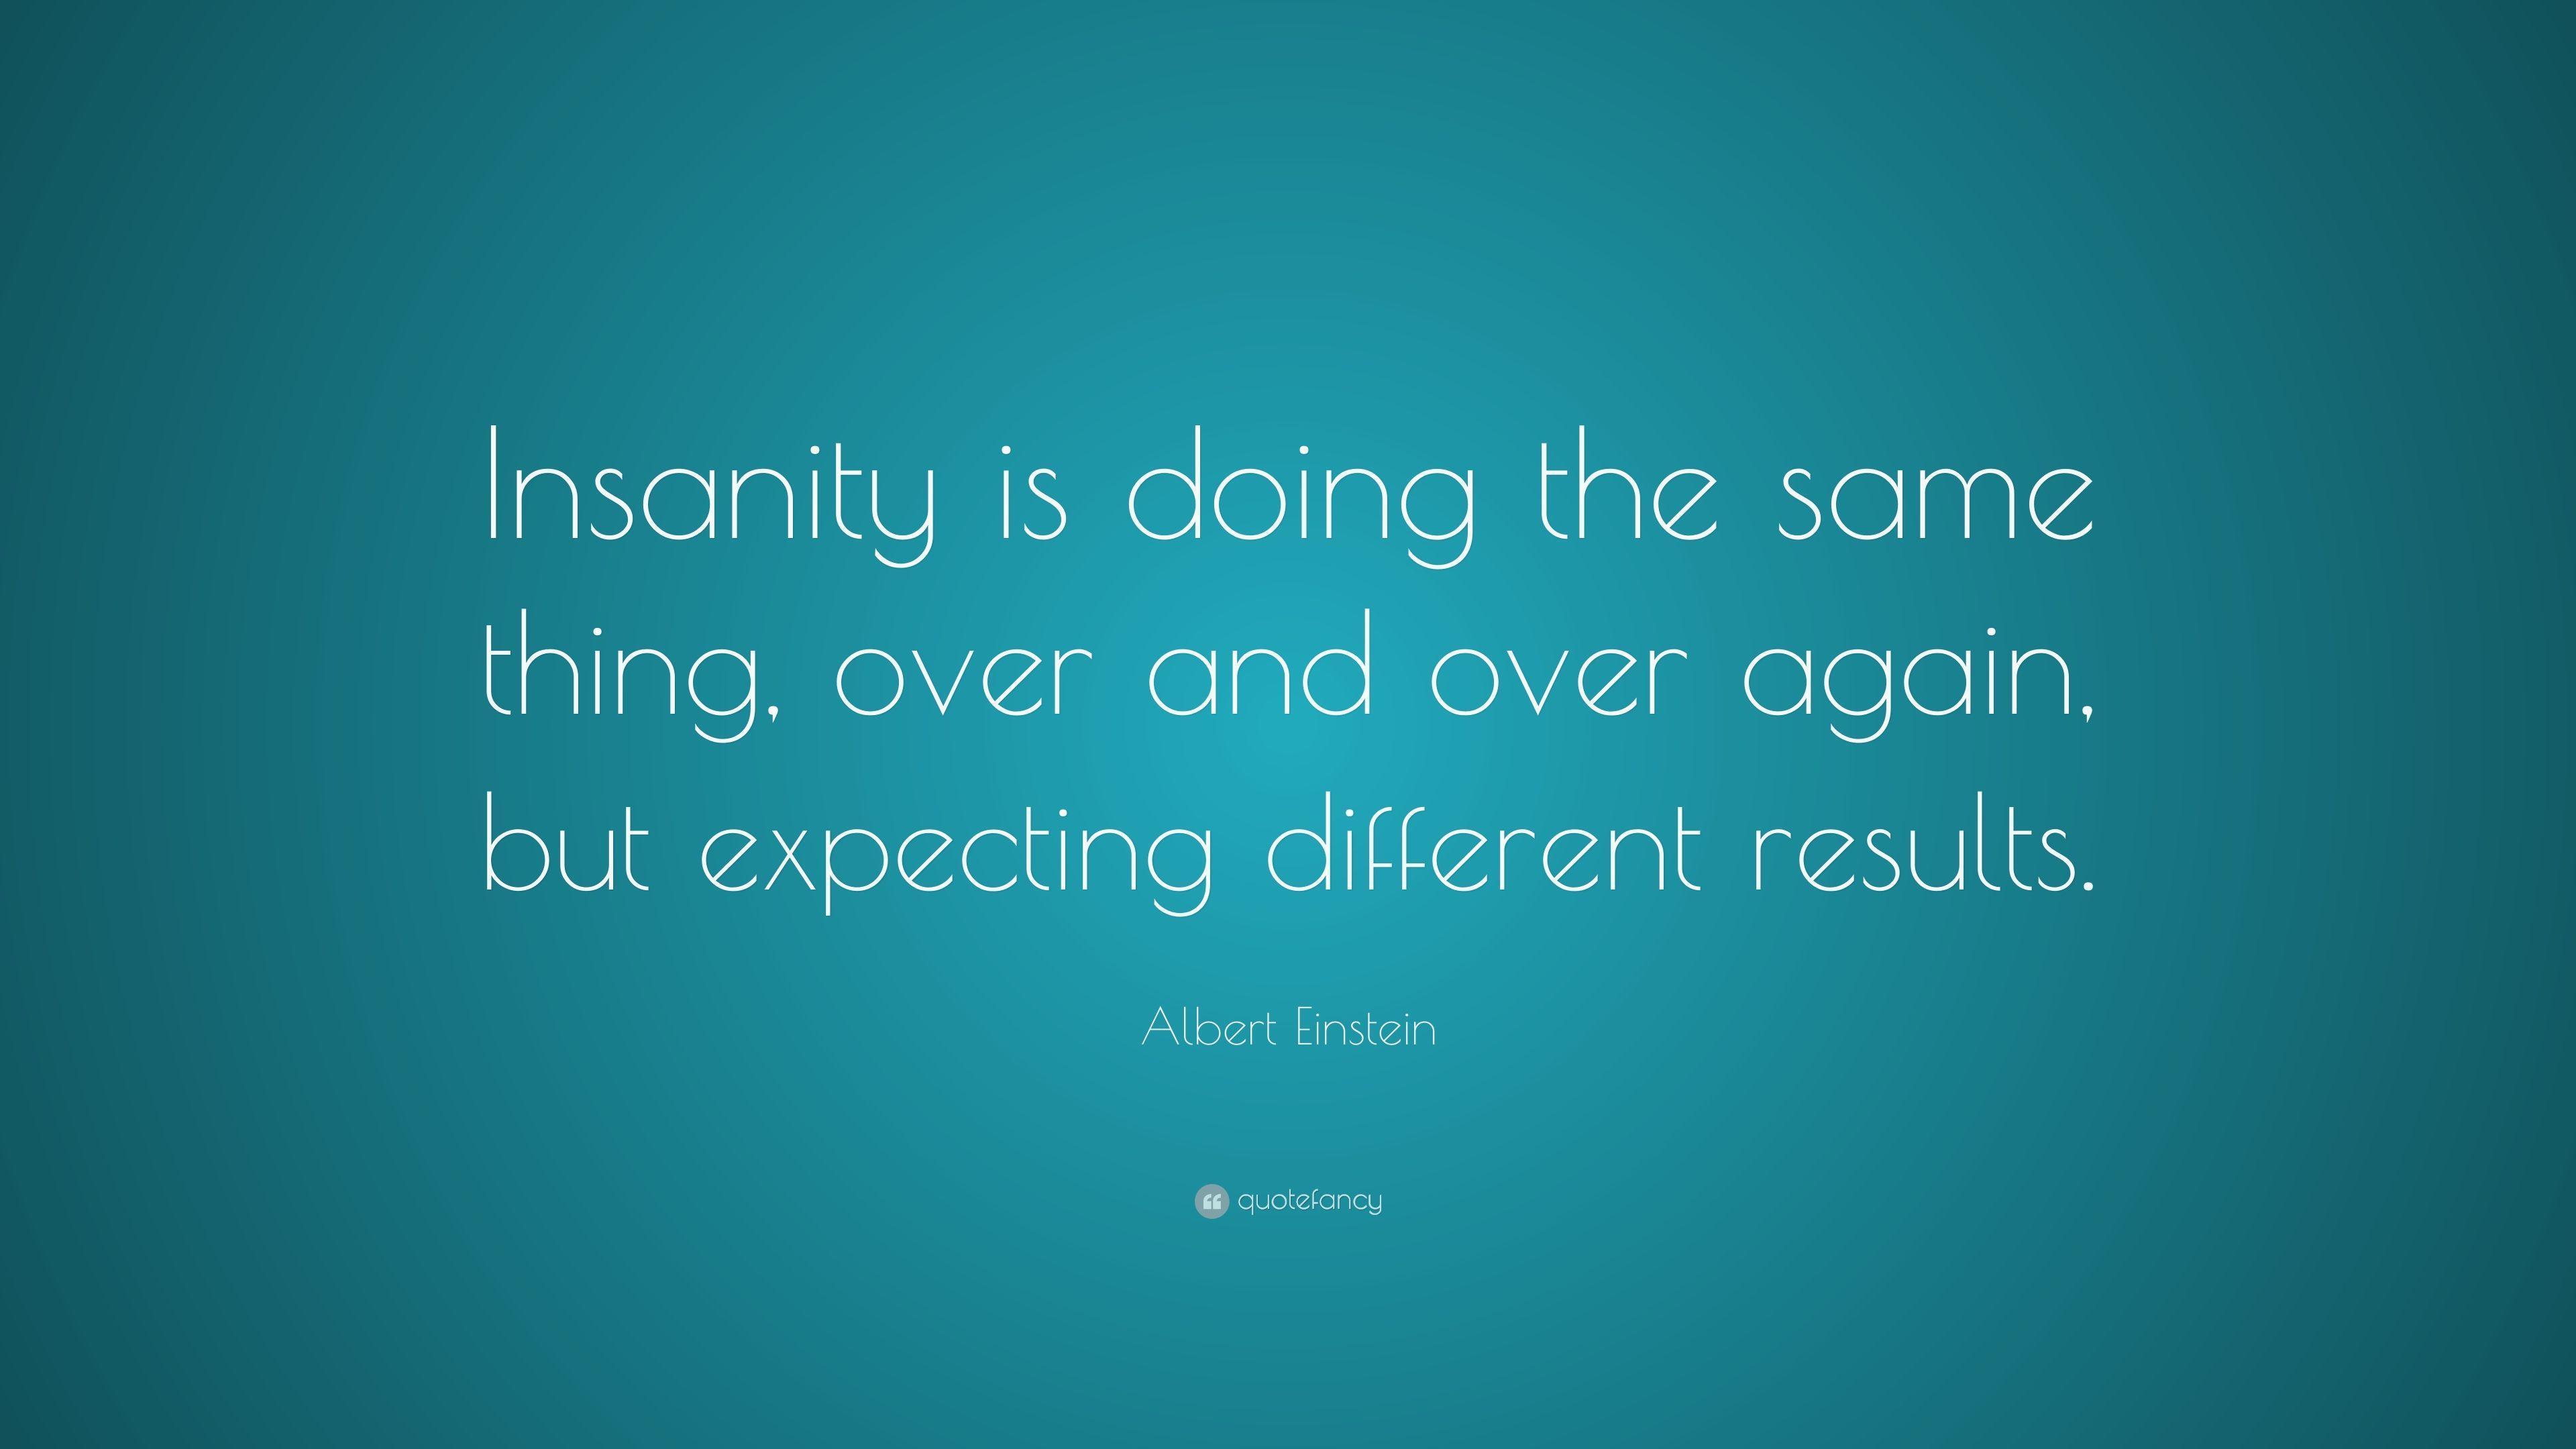 Albert Einstein Quote: “Insanity is doing the same thing, over